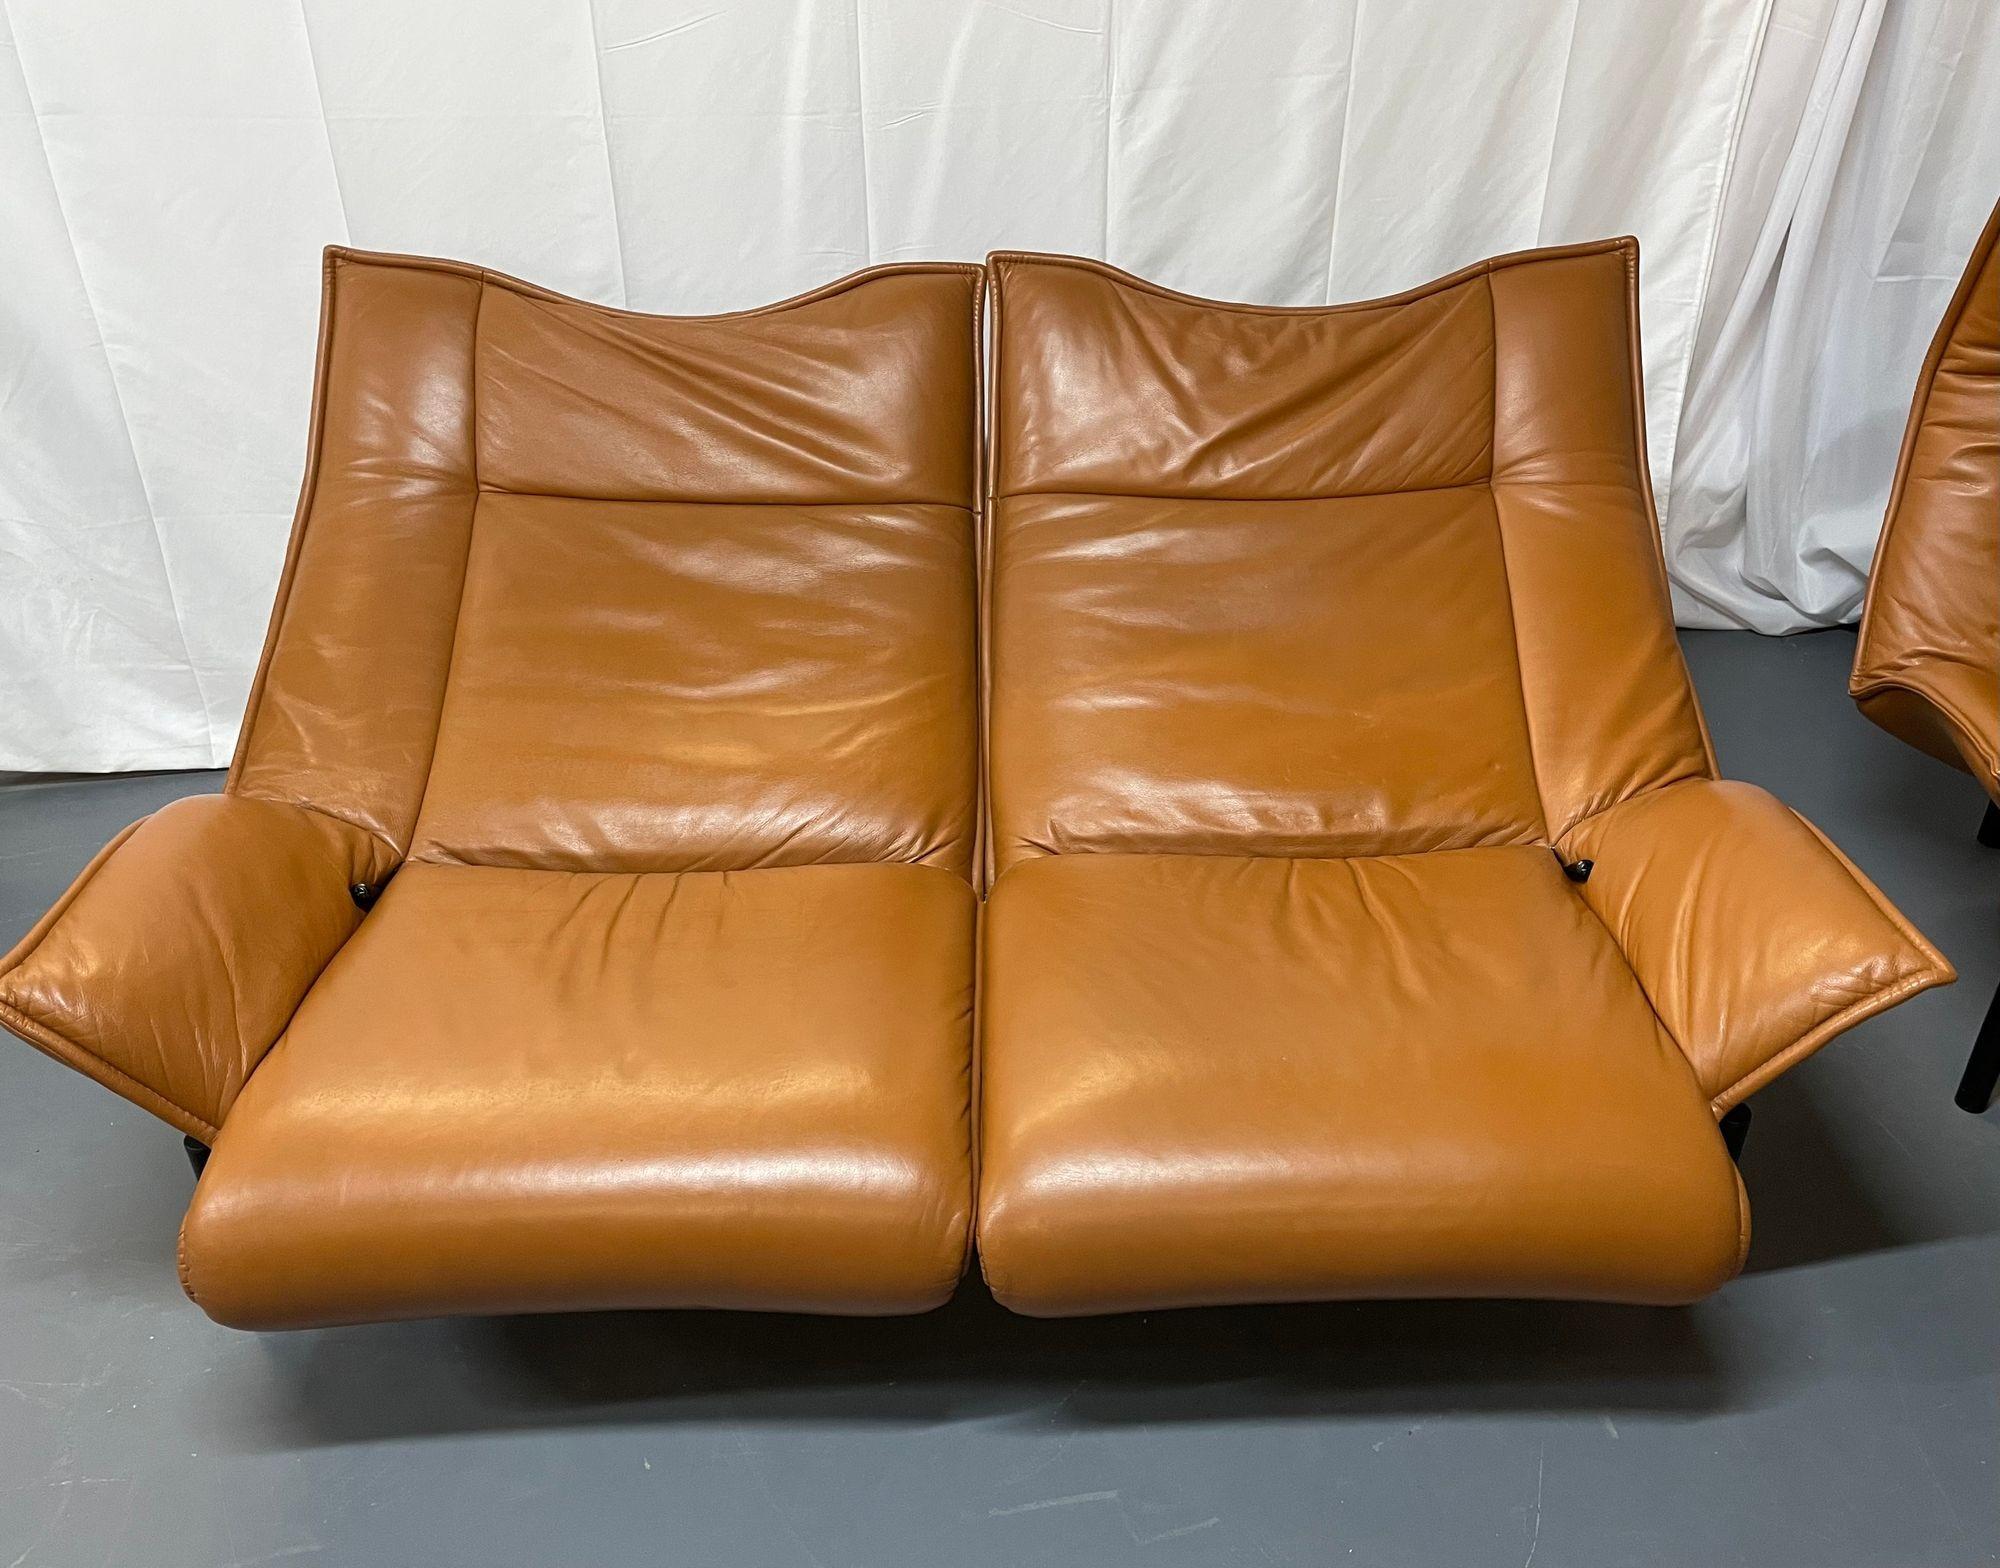 Vico Magistretti for Cassina Veranda Sofa, Two-Seater, Leather, Italian Modern. Seat height 16 inches. 
 
Both unique and highly functional, this sofa is made of fine leather that transforms into many comfortable and stable positions. In addition